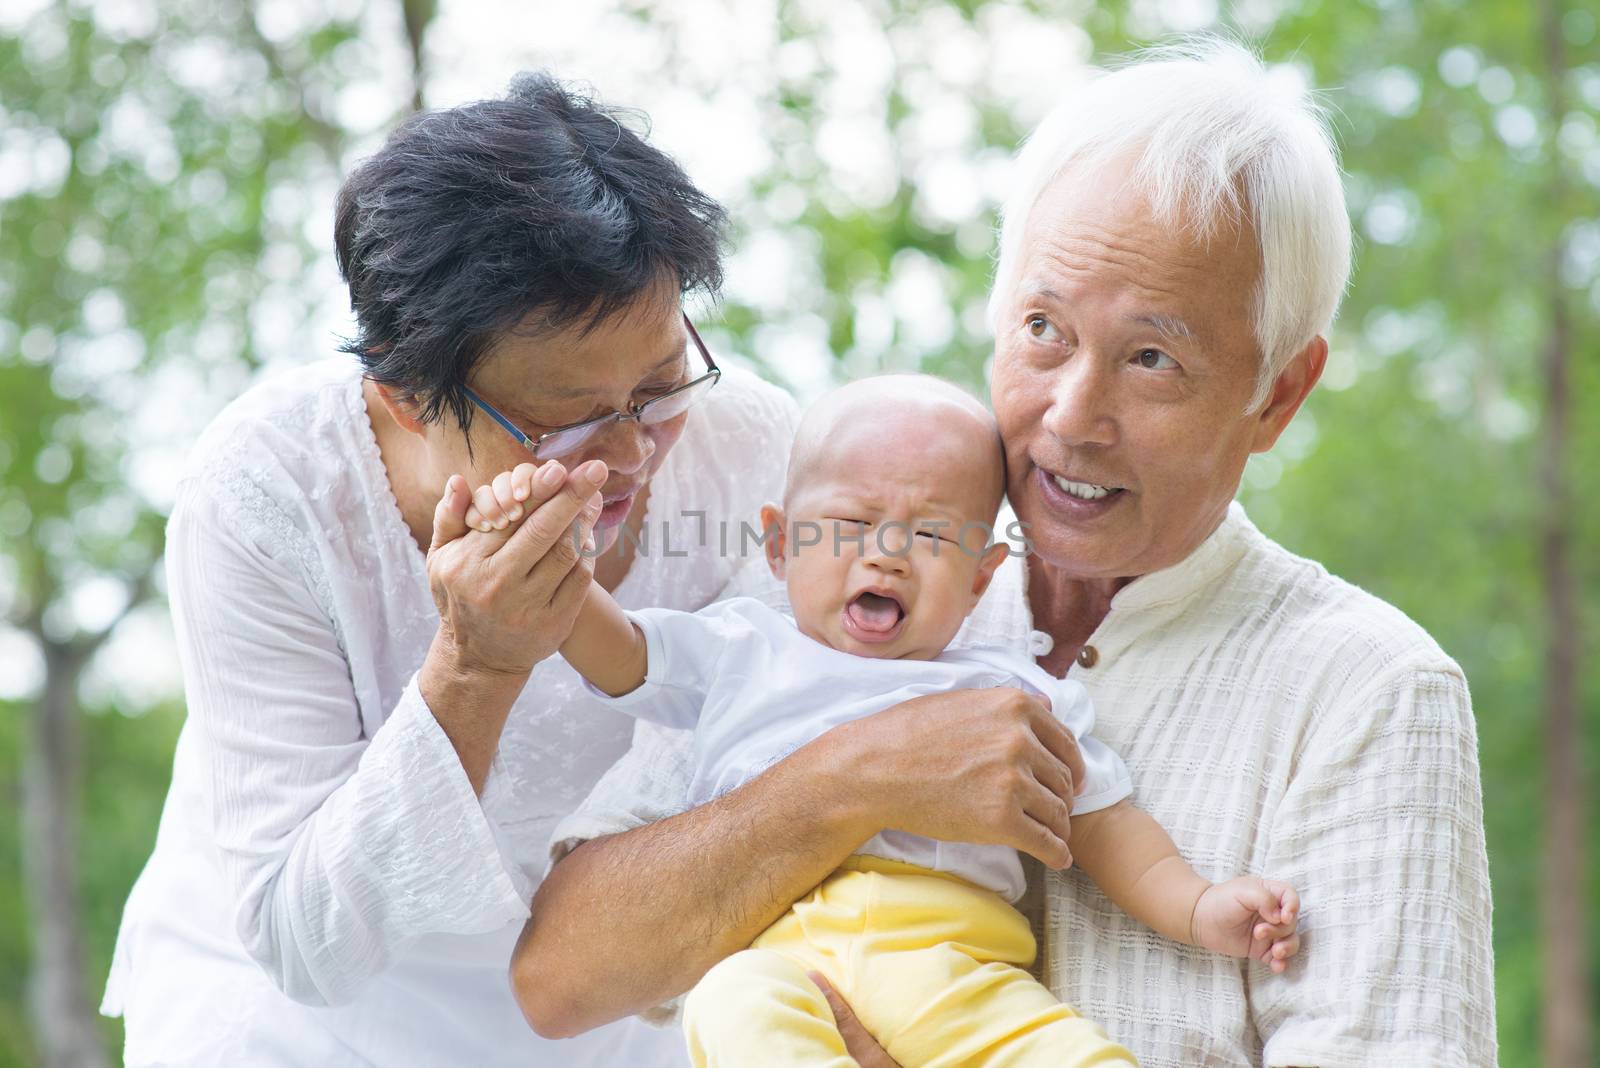 Asian crying baby comforted by grandparents at outdoor garden